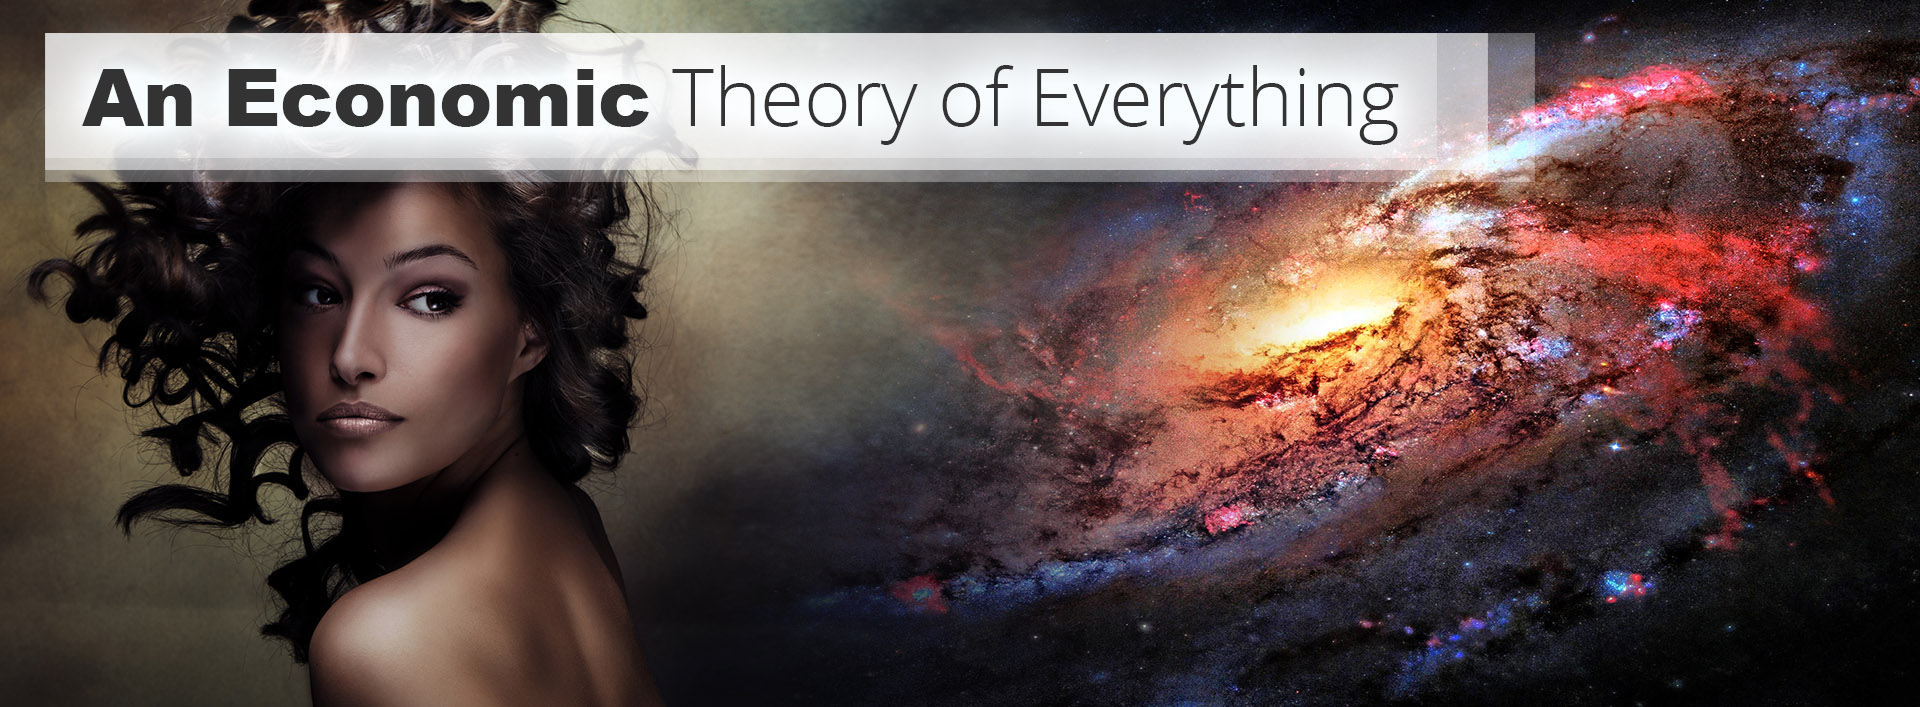 An-Economic-Theory-of-Everything